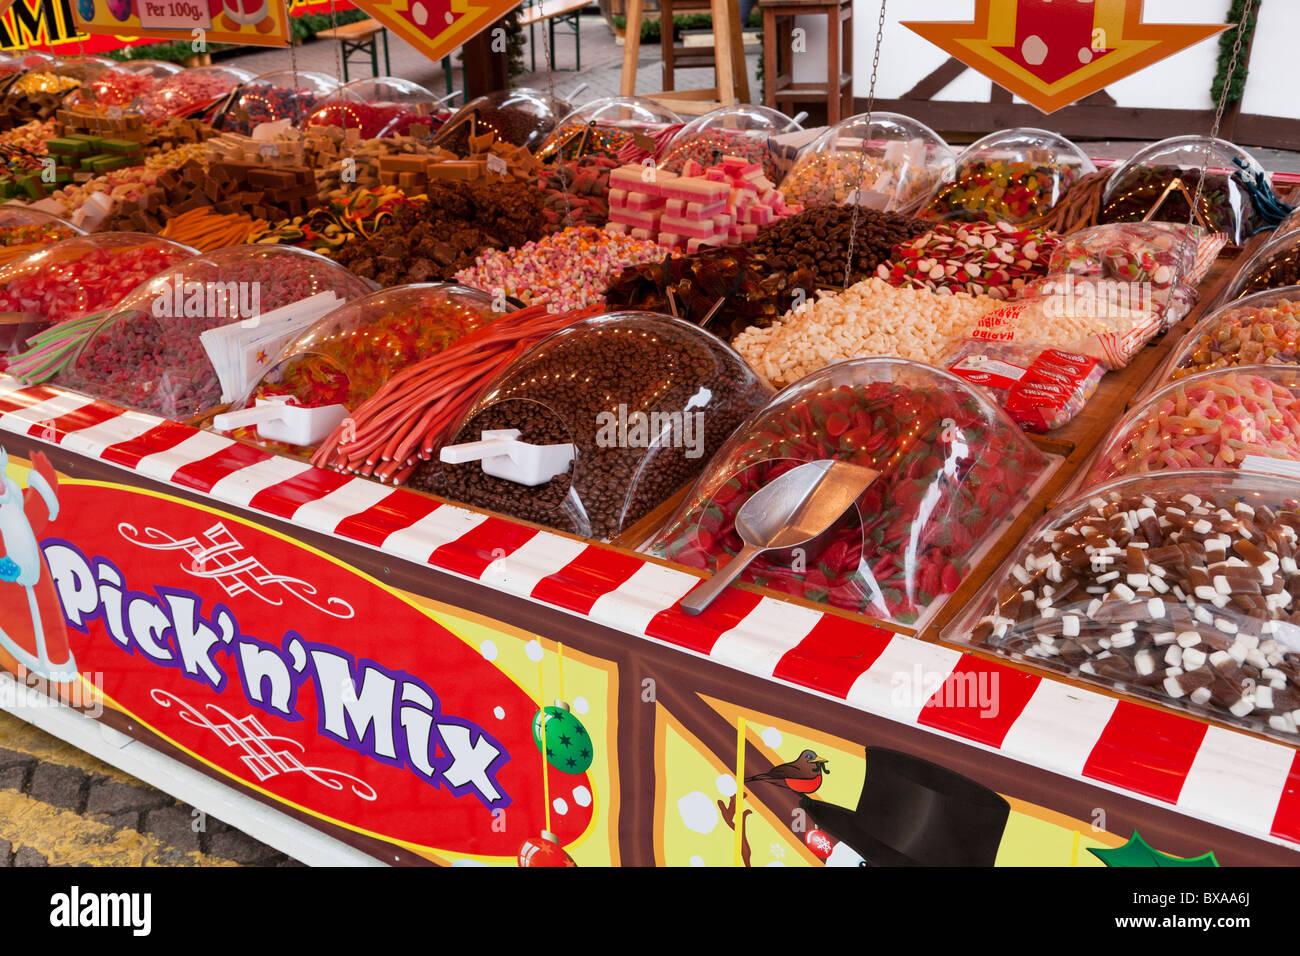 https://c8.alamy.com/comp/BXAA6J/a-display-of-pick-n-mix-sweets-for-sale-on-a-market-stall-kingston-BXAA6J.jpg